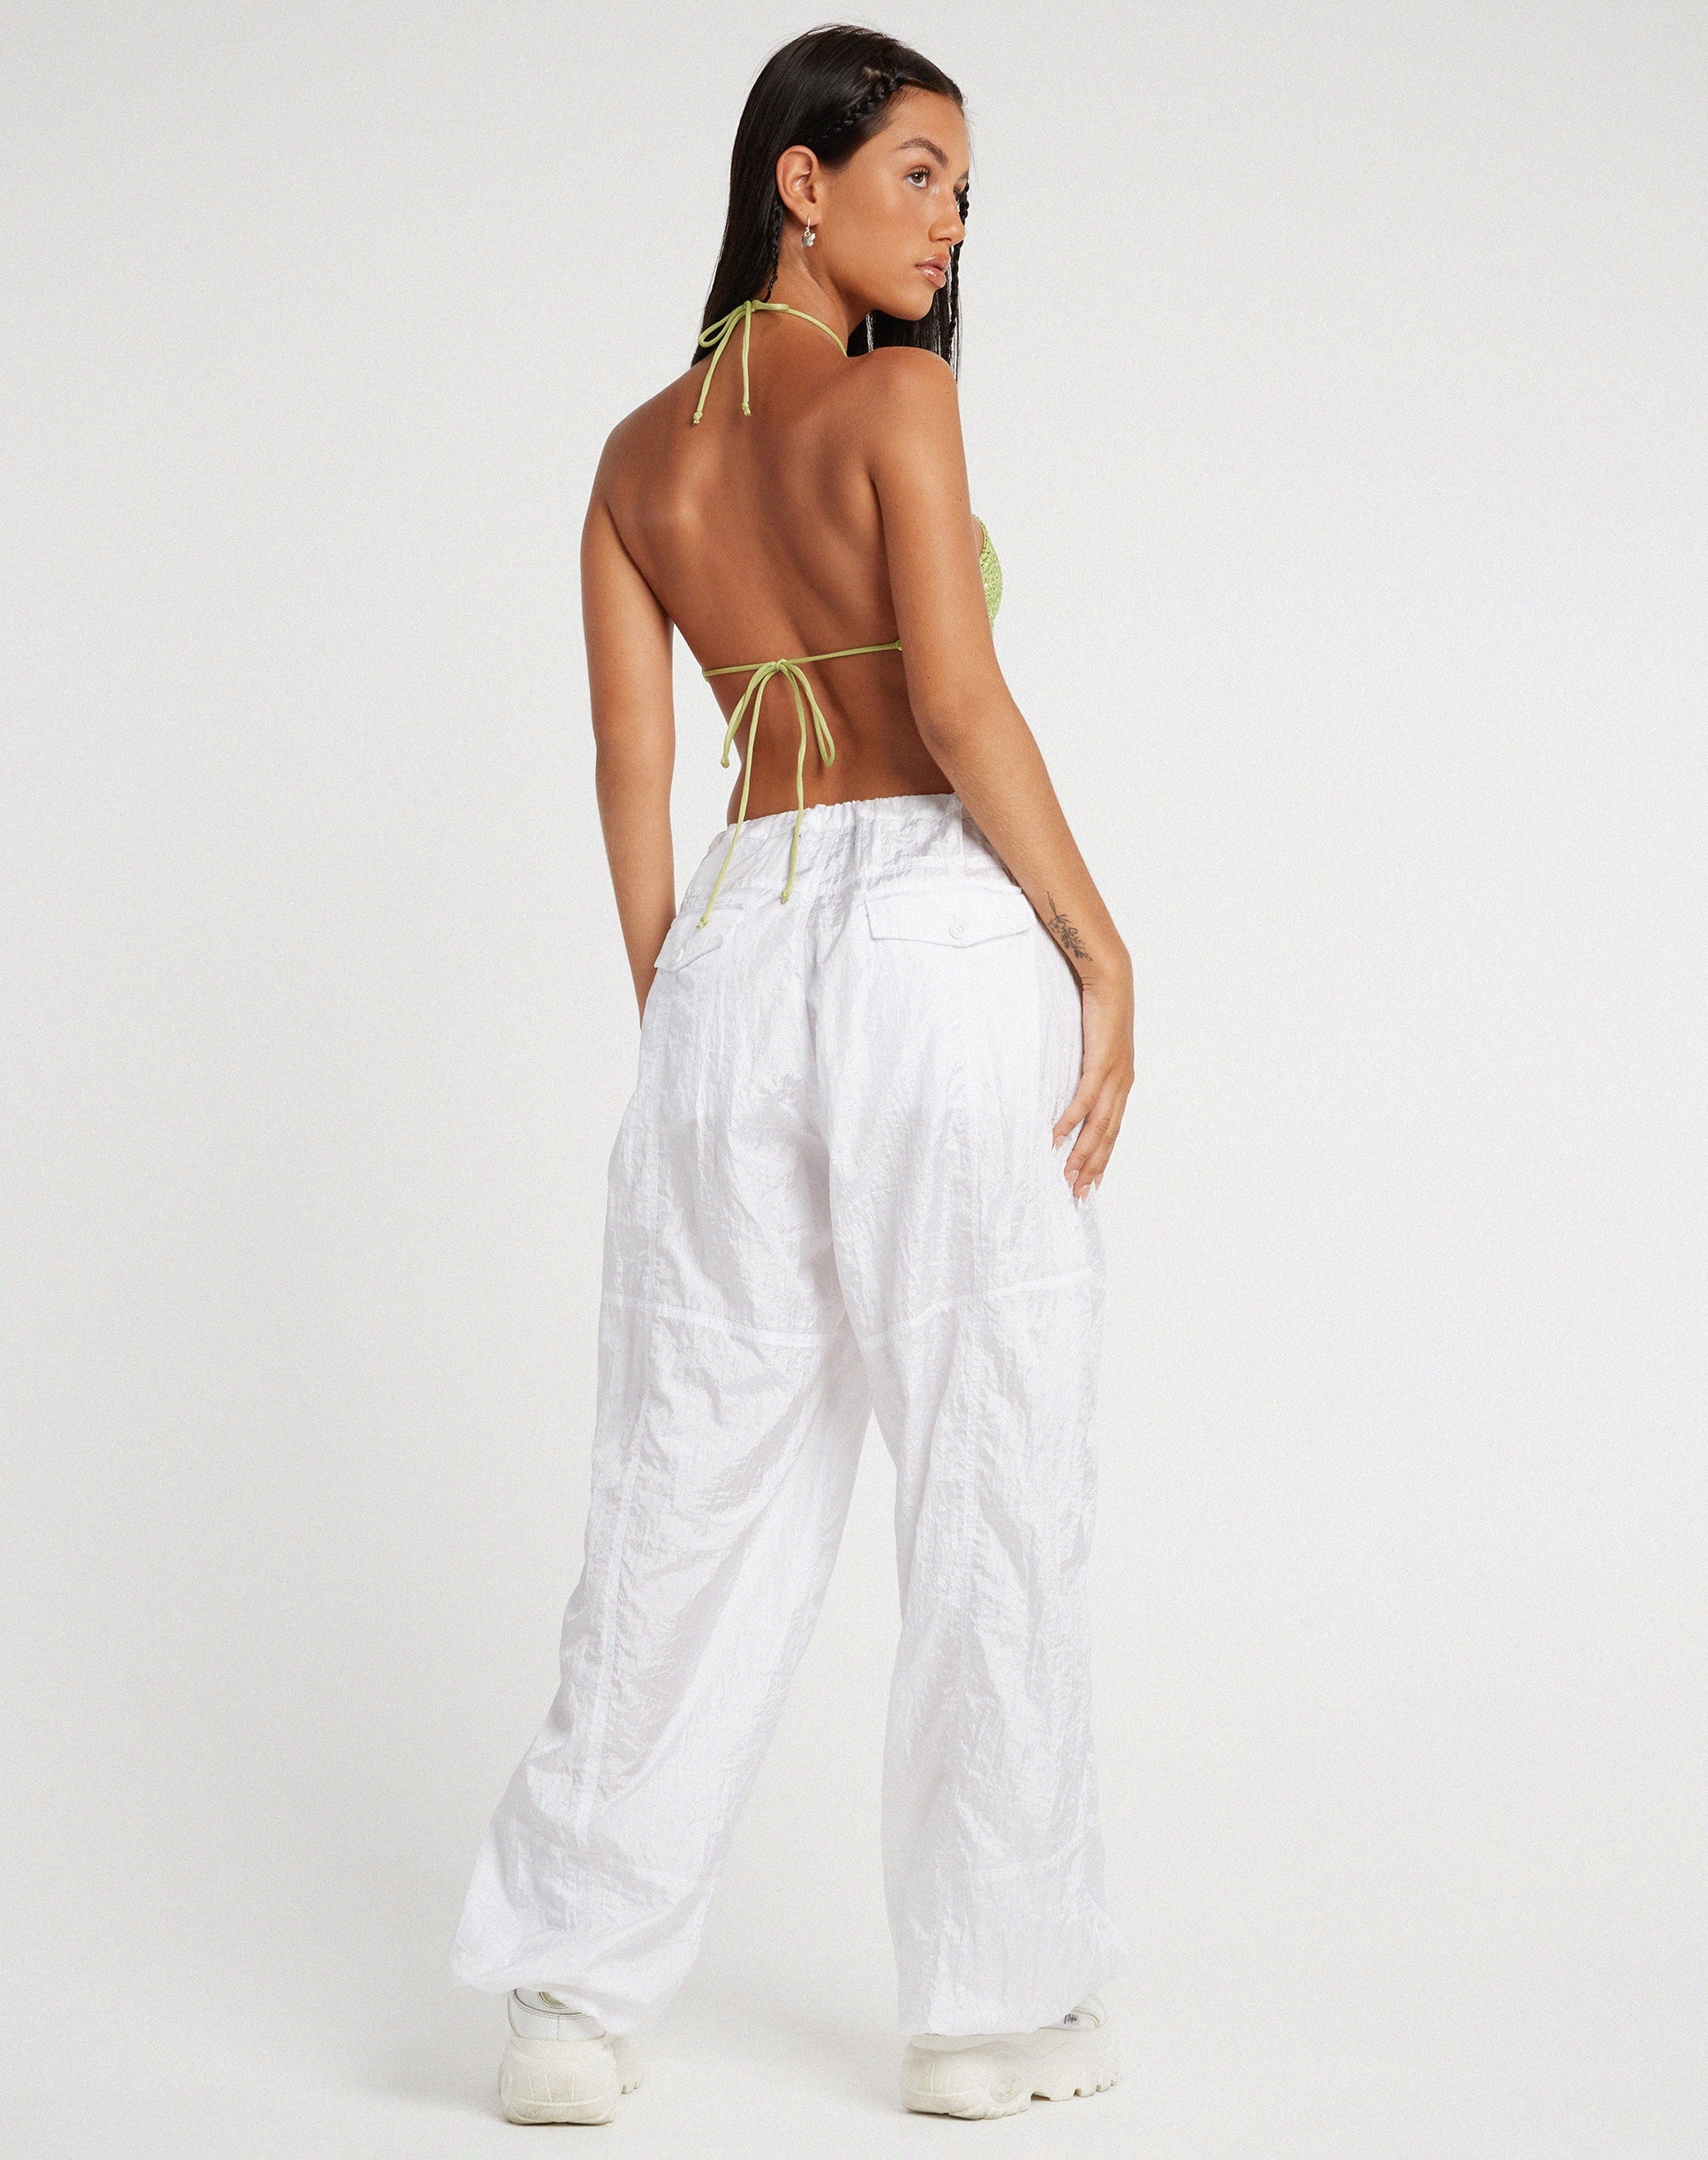 image of Tinimi Crop Top in Drape Sequin Lime Green